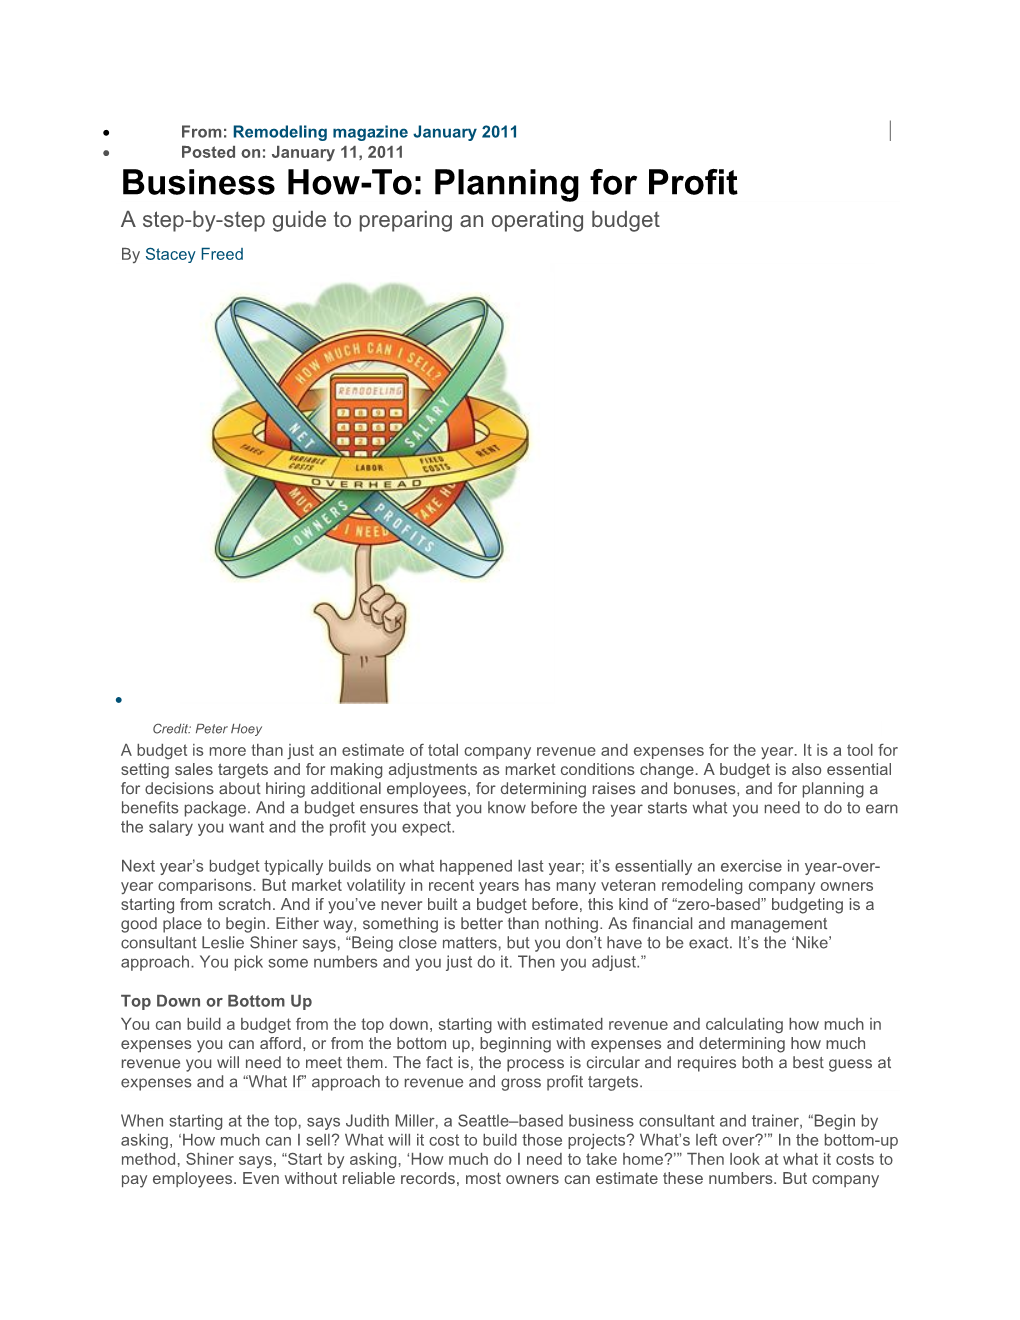 Business How-To: Planning for Profit